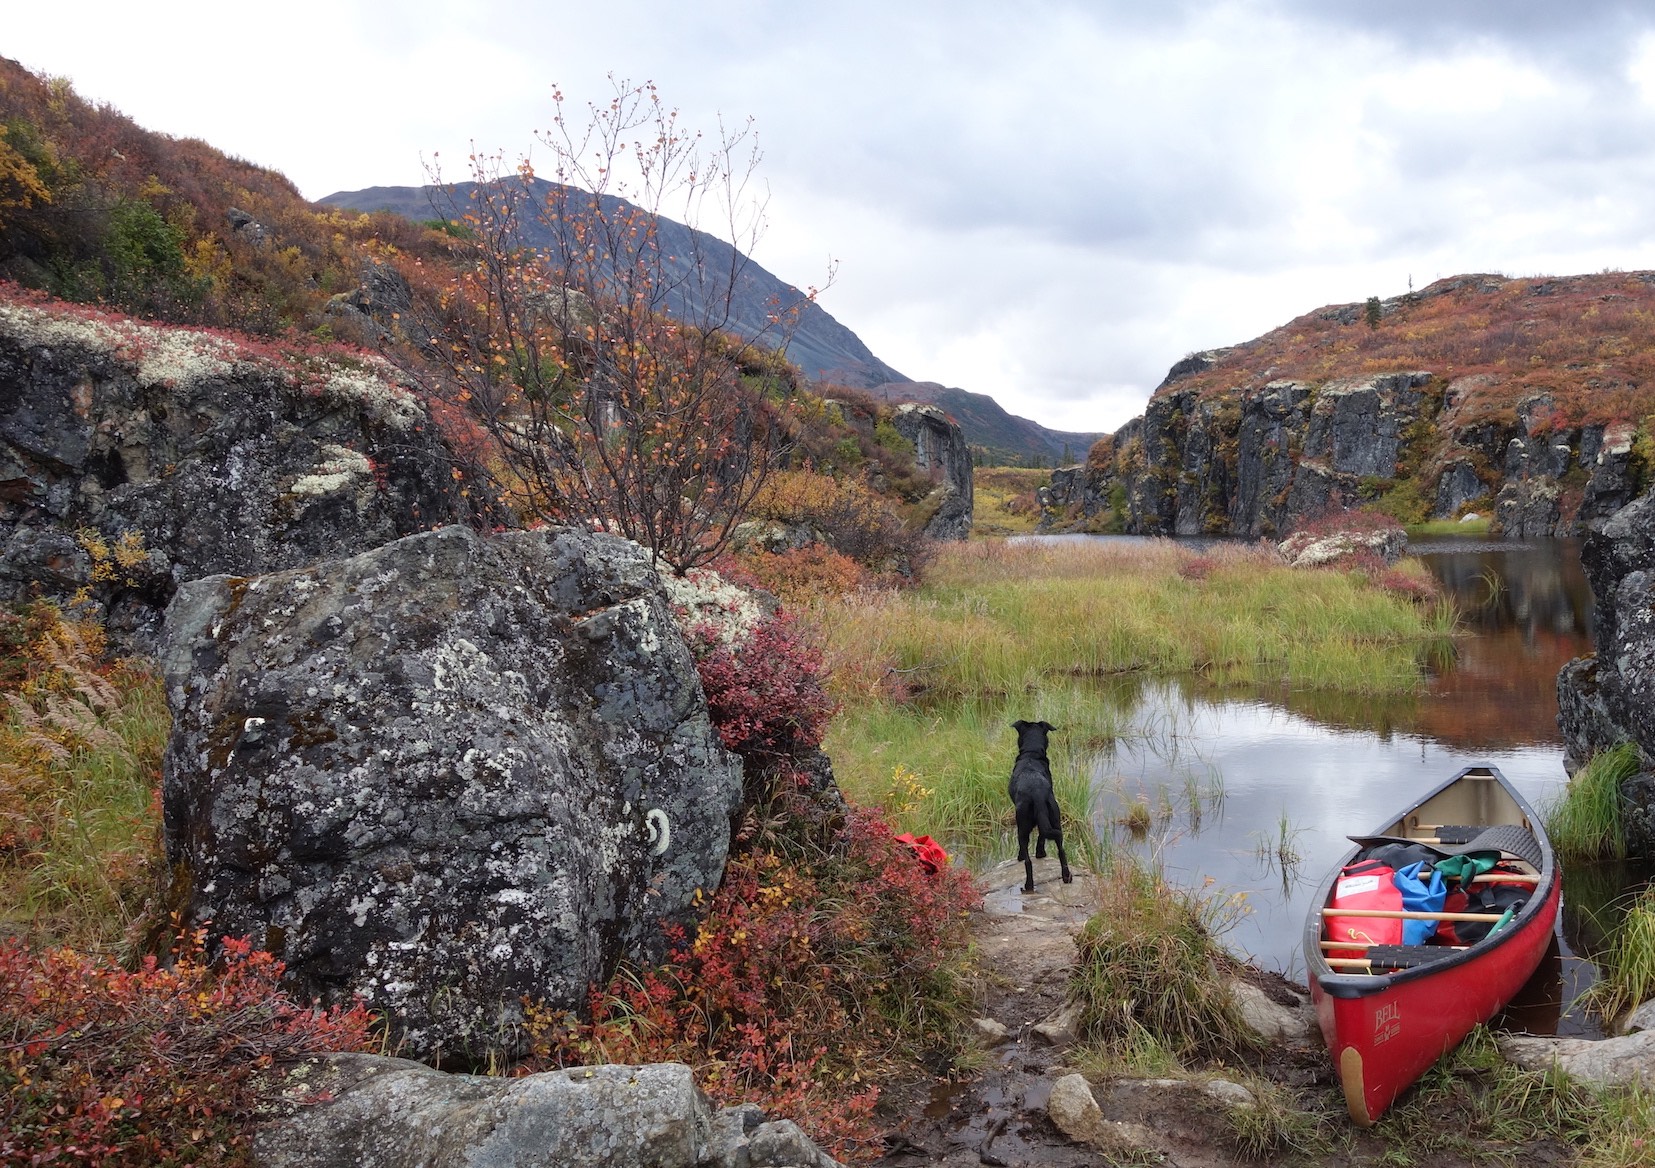 A canoe rests on still water in a small bay in a river's rock canyon while a dog stands on shore next to it.